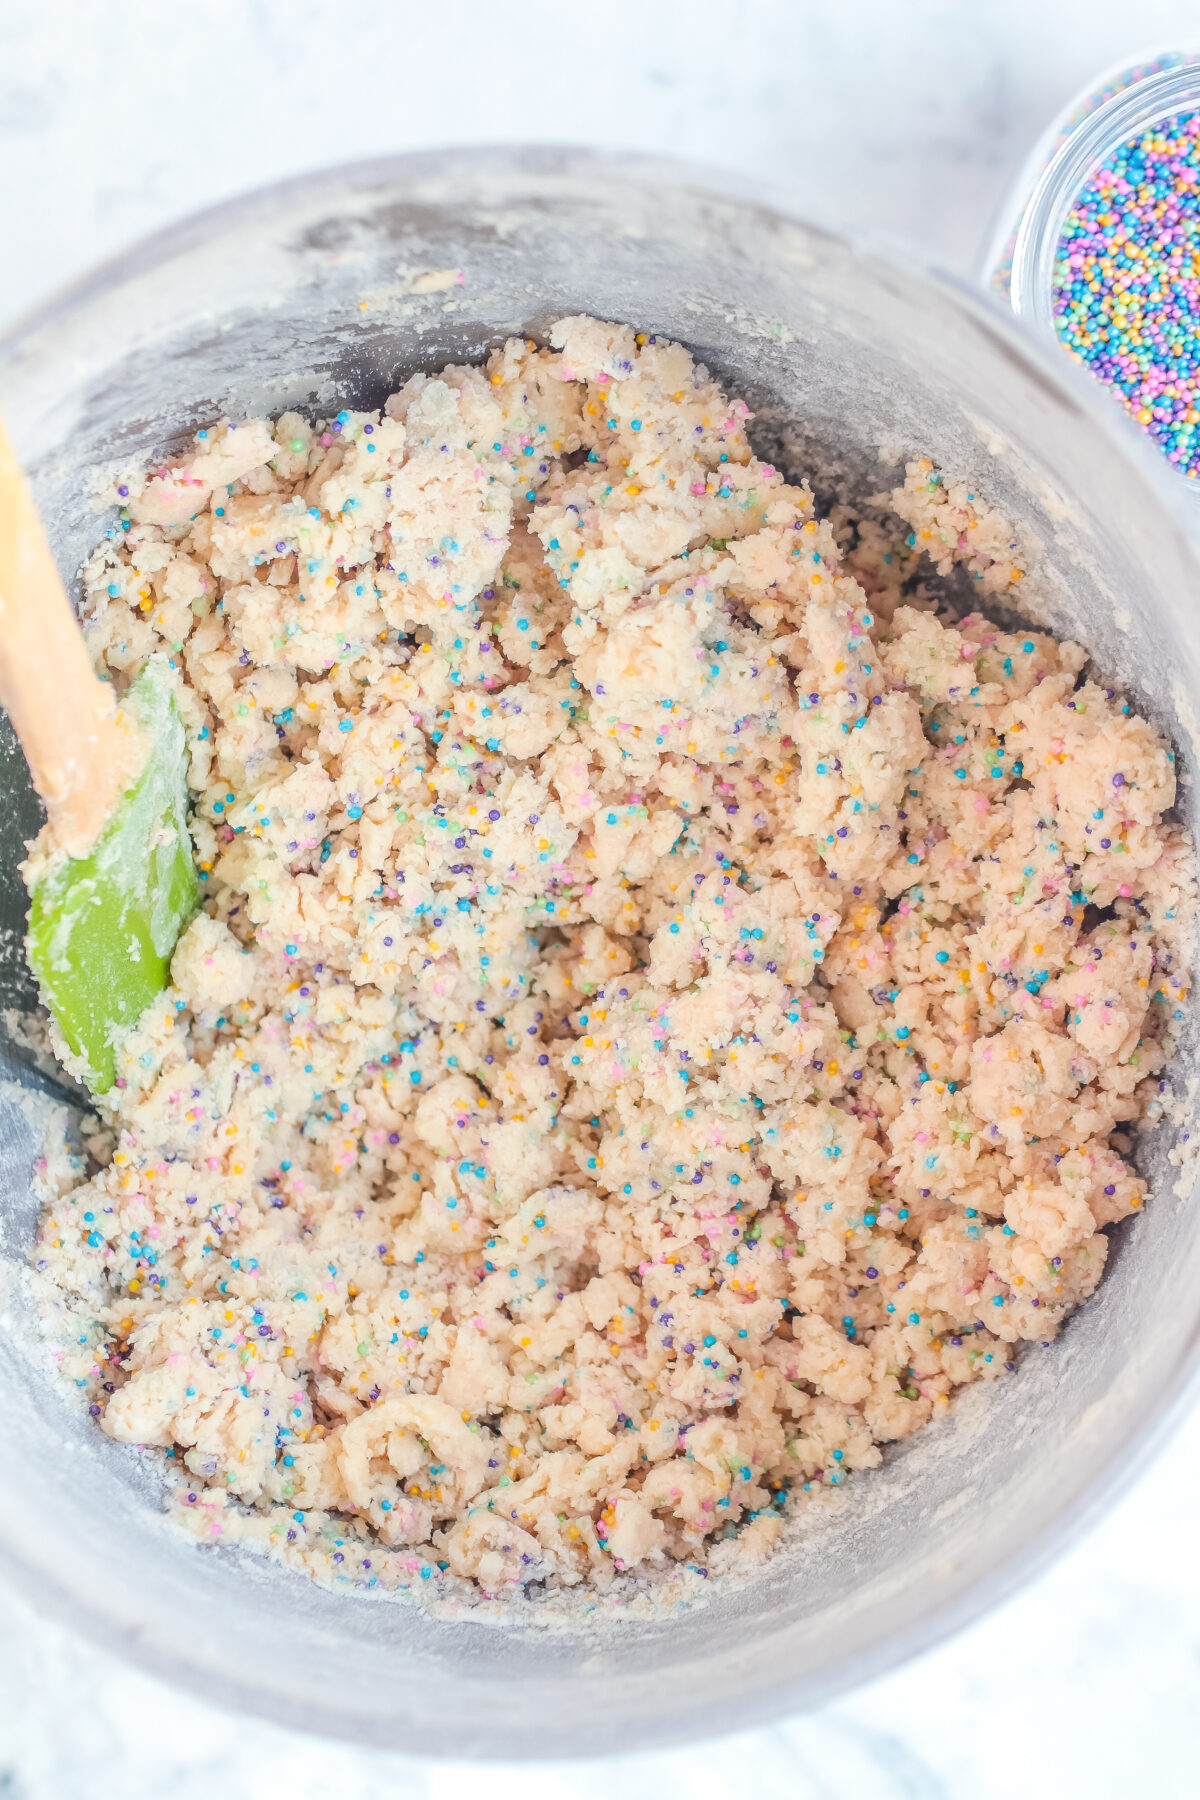 Cookie dough in a bowl with sprinkles being mixed in.